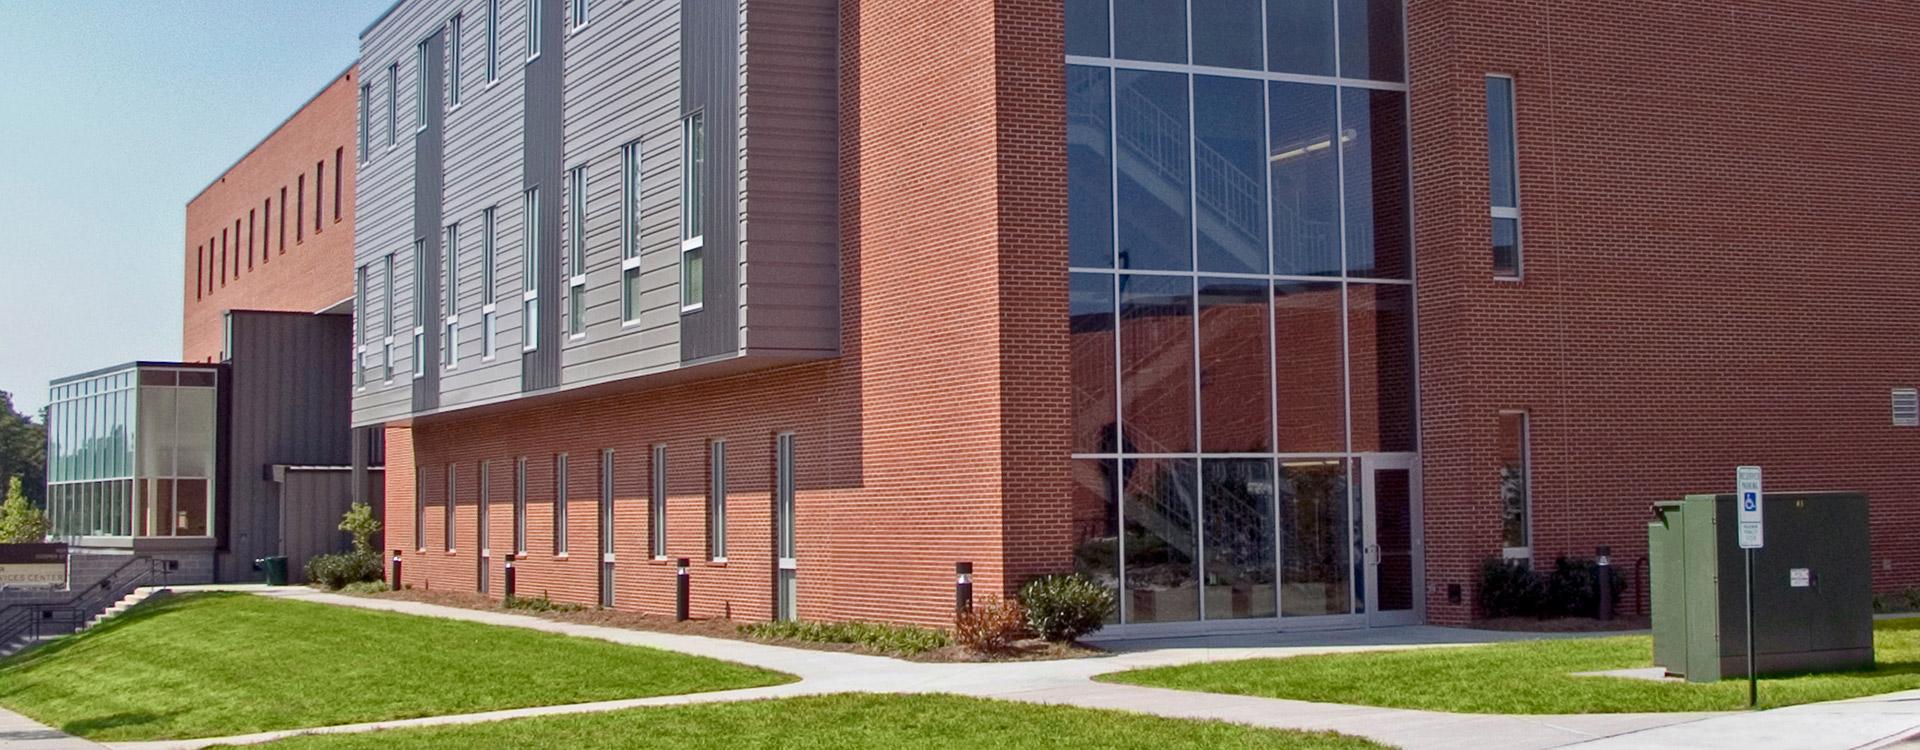 brick, gray panel, and glass campus building